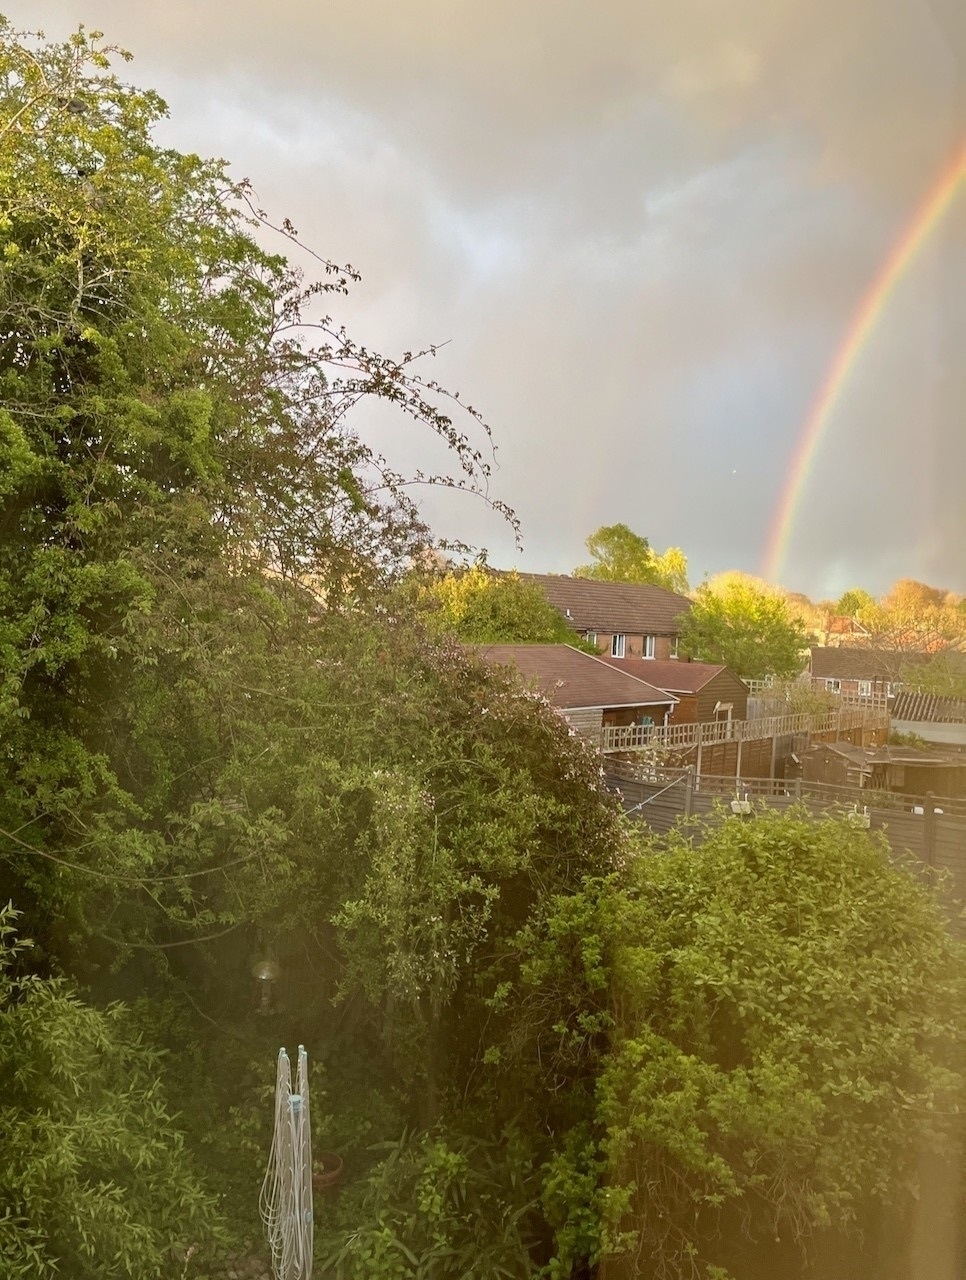 Viewed through a window, a bright rainbow stands out against a dark grey sky to the right of a view of trees and houses.